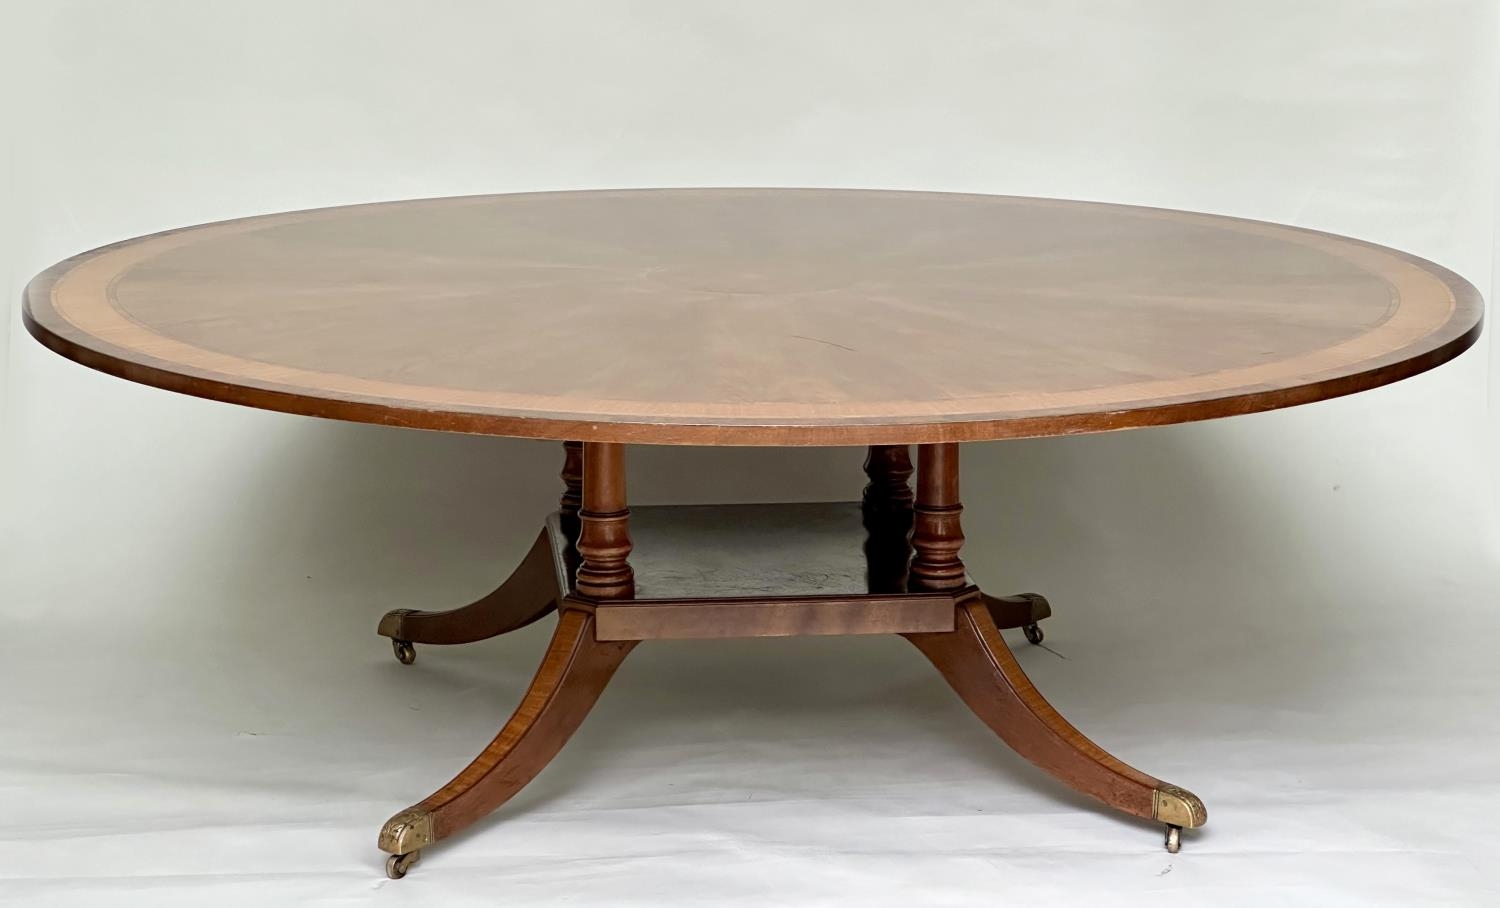 DINING TABLE, circular Regency style radially veneered mahogany and satinwood crossbanded with